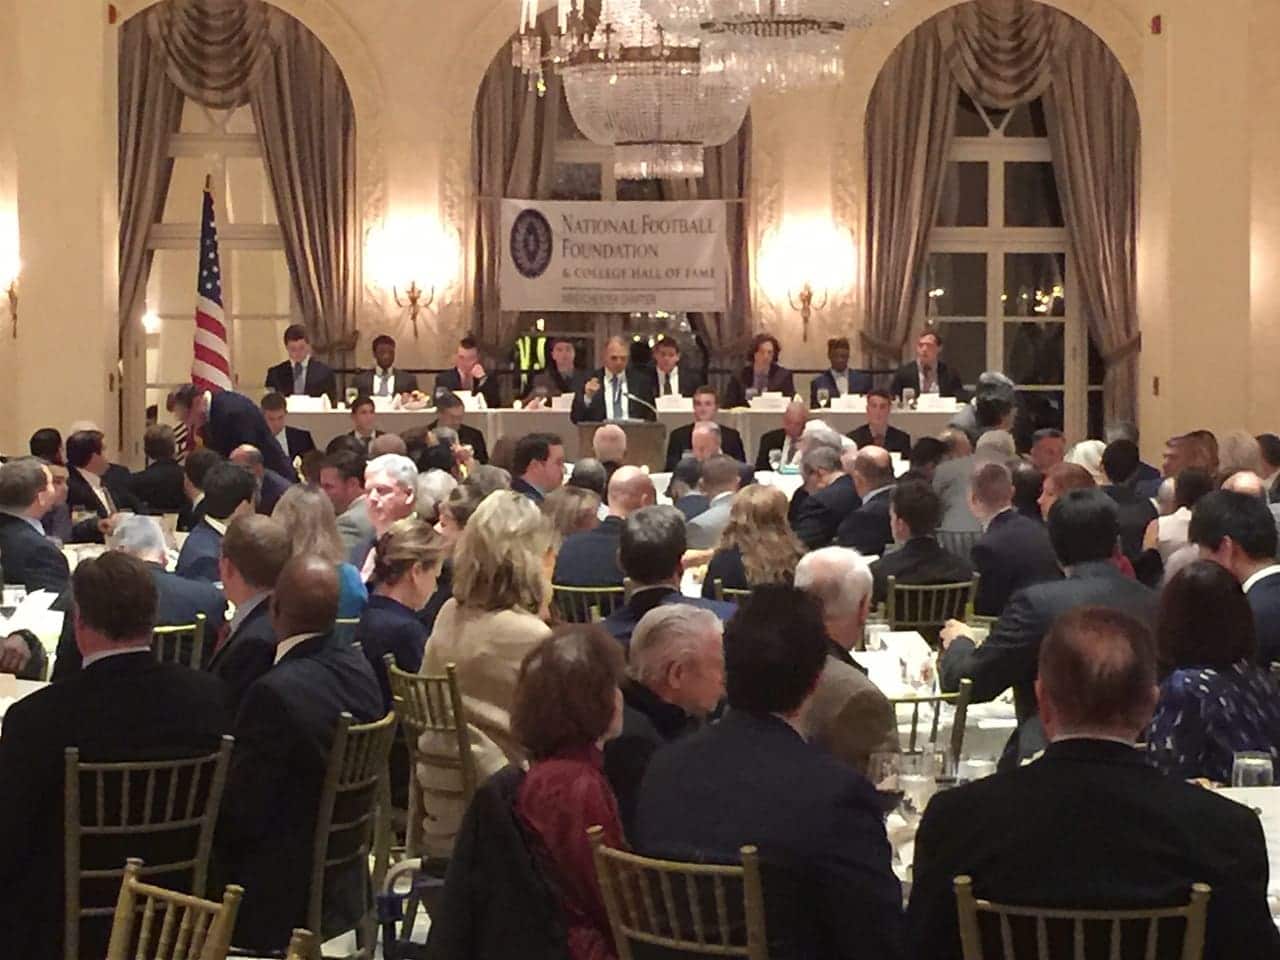 The Golden Dozen Award Banquet will be held in January at the Westchester Country Club.